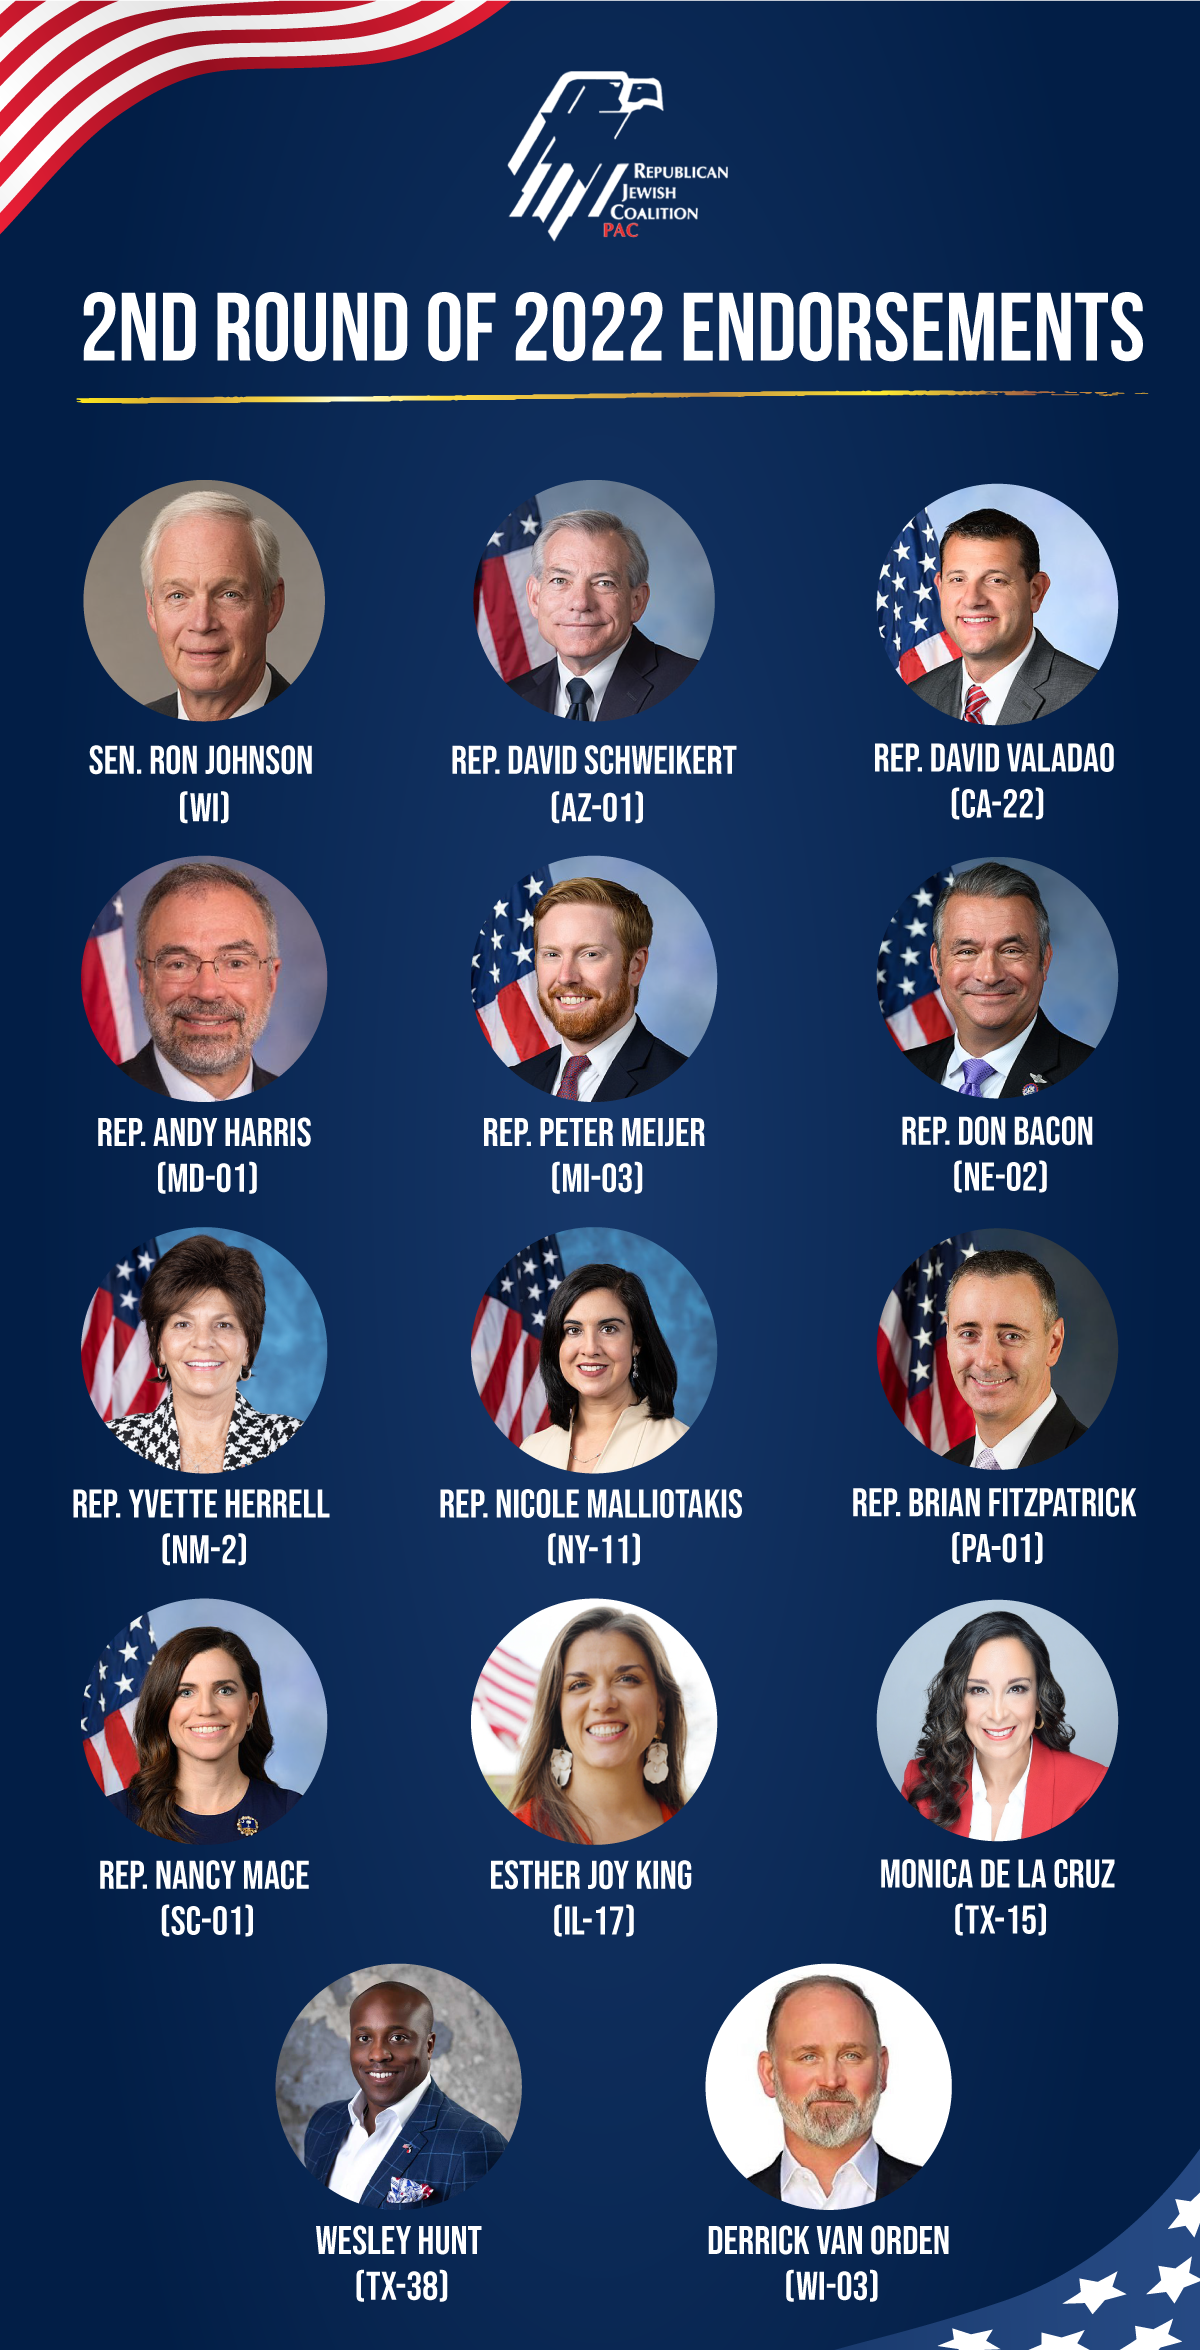 RJCPAC 2nd round endorsees